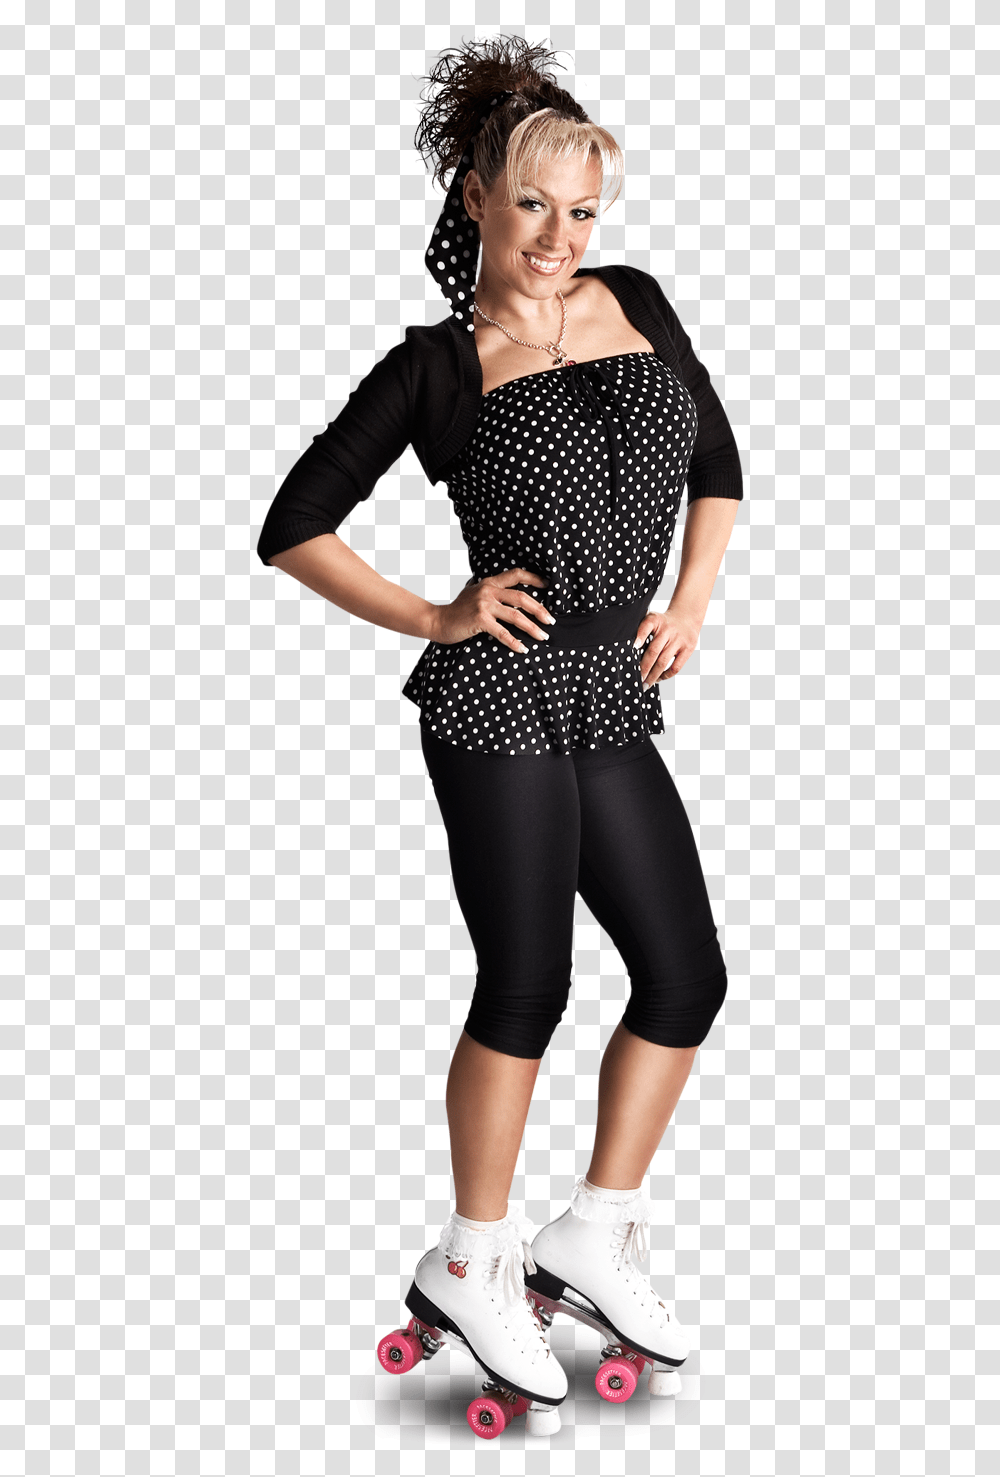 Maria Kanellis Women In Wwe, Person, Sleeve, Pants Transparent Png